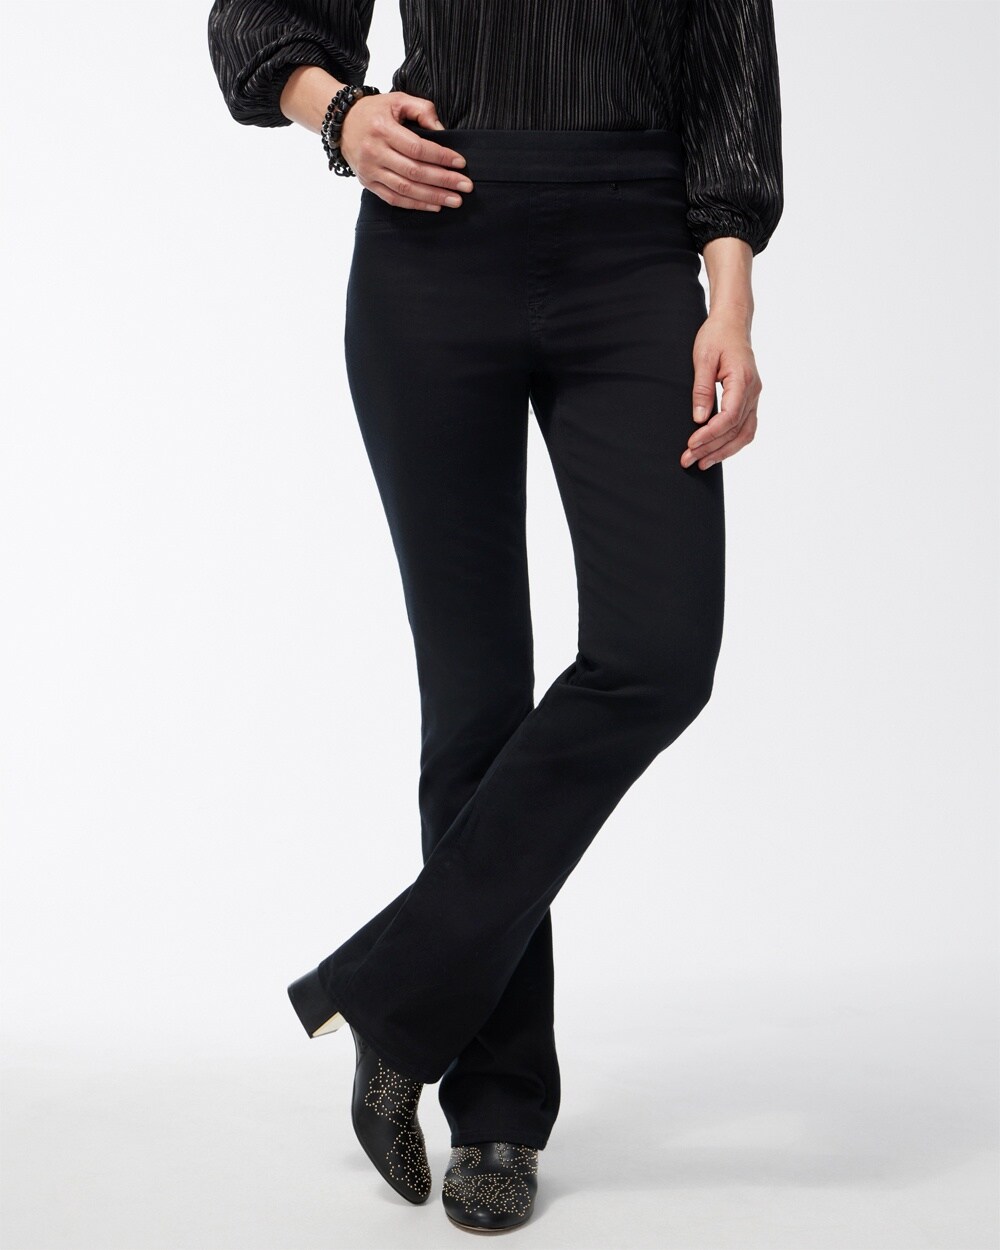 Black Pull-on Bootcut Jeggings video preview image, click to start video